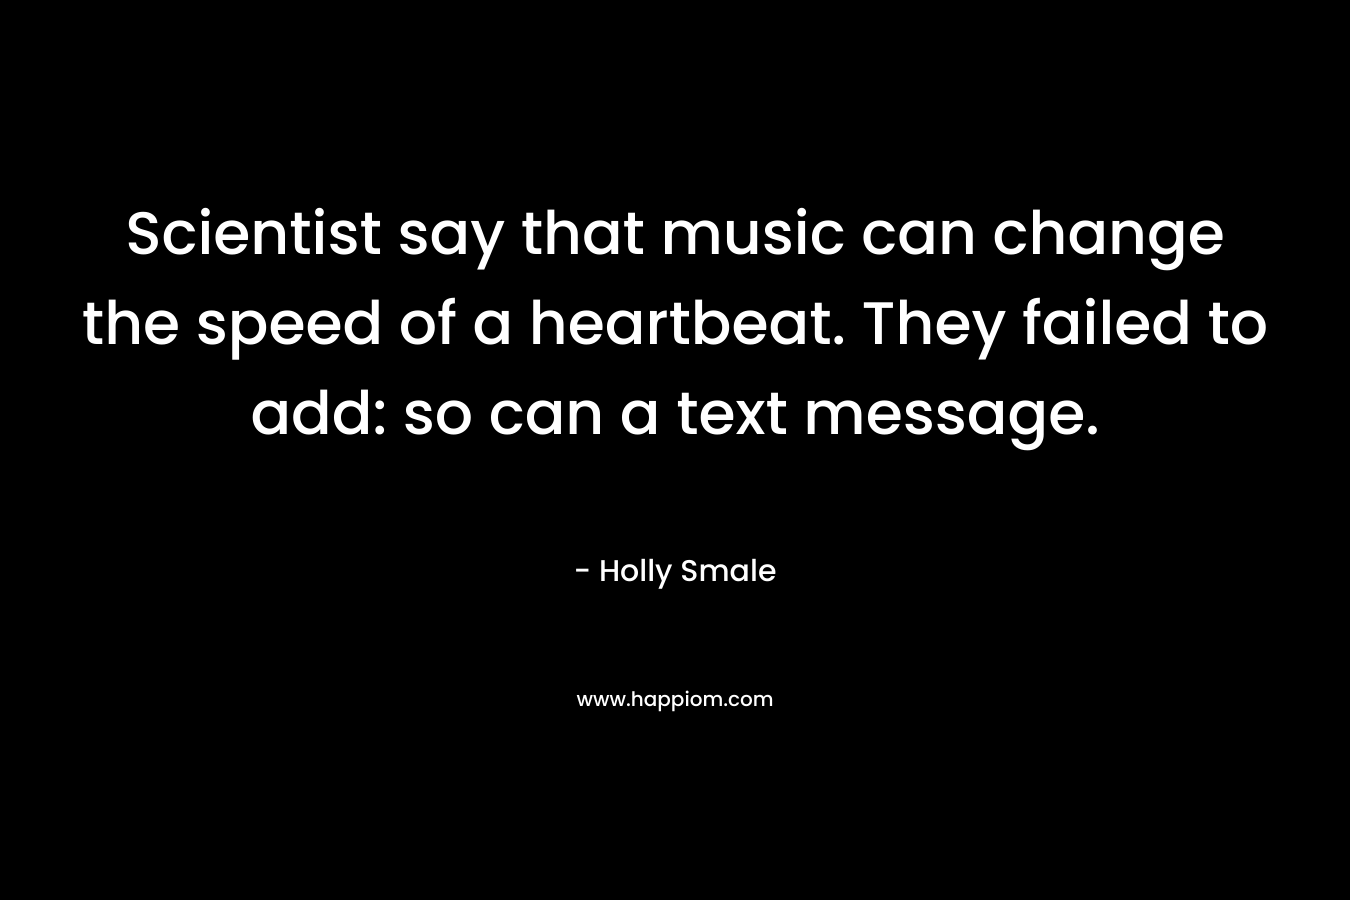 Scientist say that music can change the speed of a heartbeat. They failed to add: so can a text message.